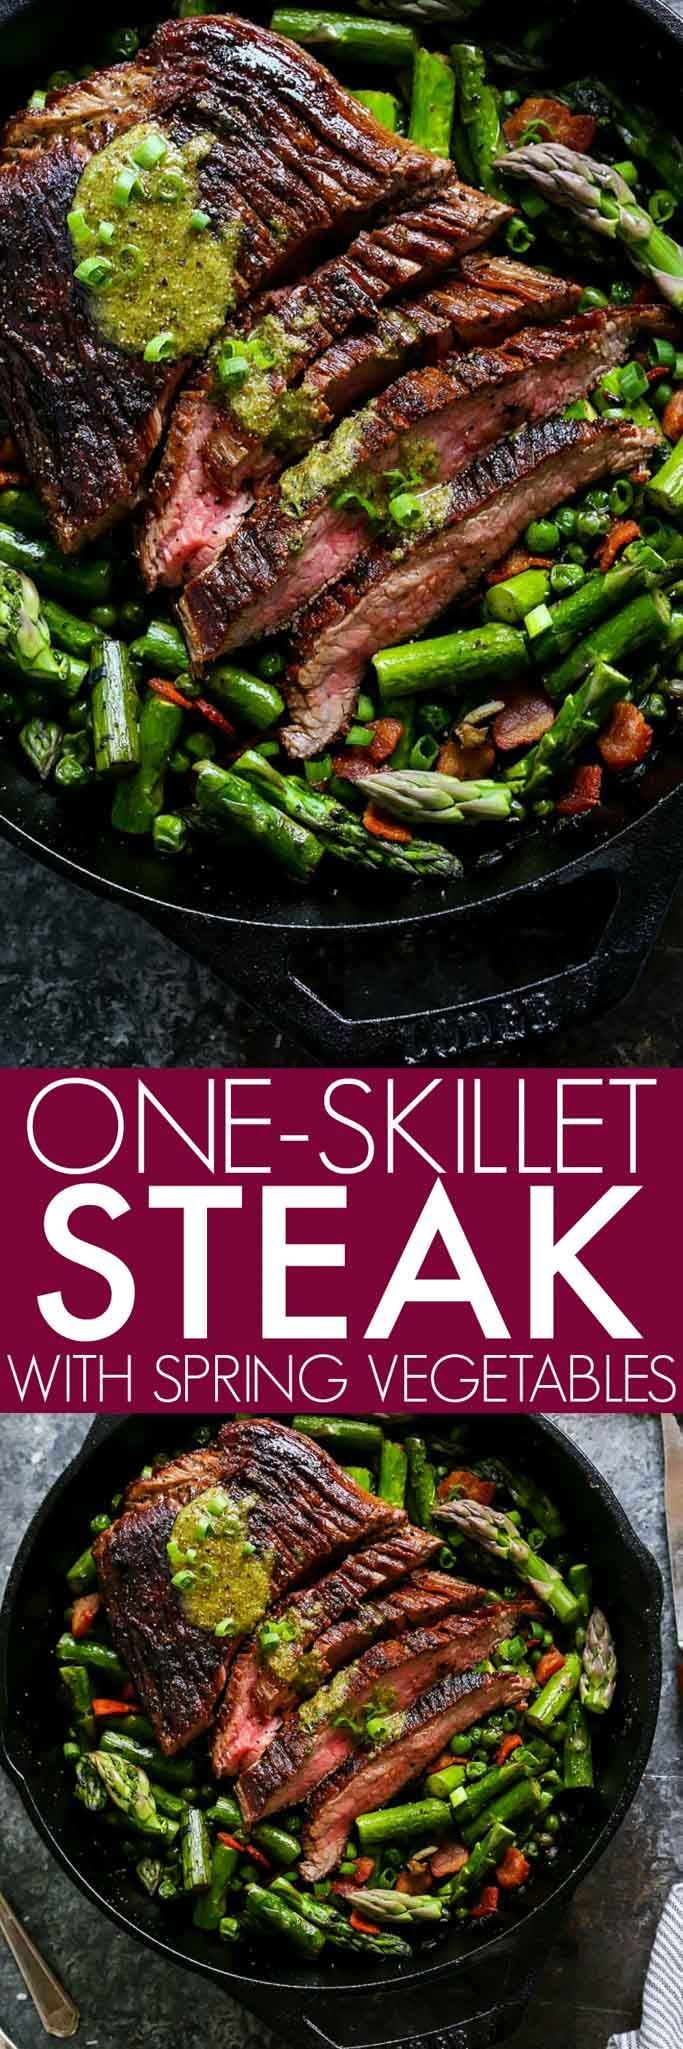 This One-Skillet Steak and Spring Vegetables with Mint Mustard Sauce is an elegant dinner that’s easy enough for weekday